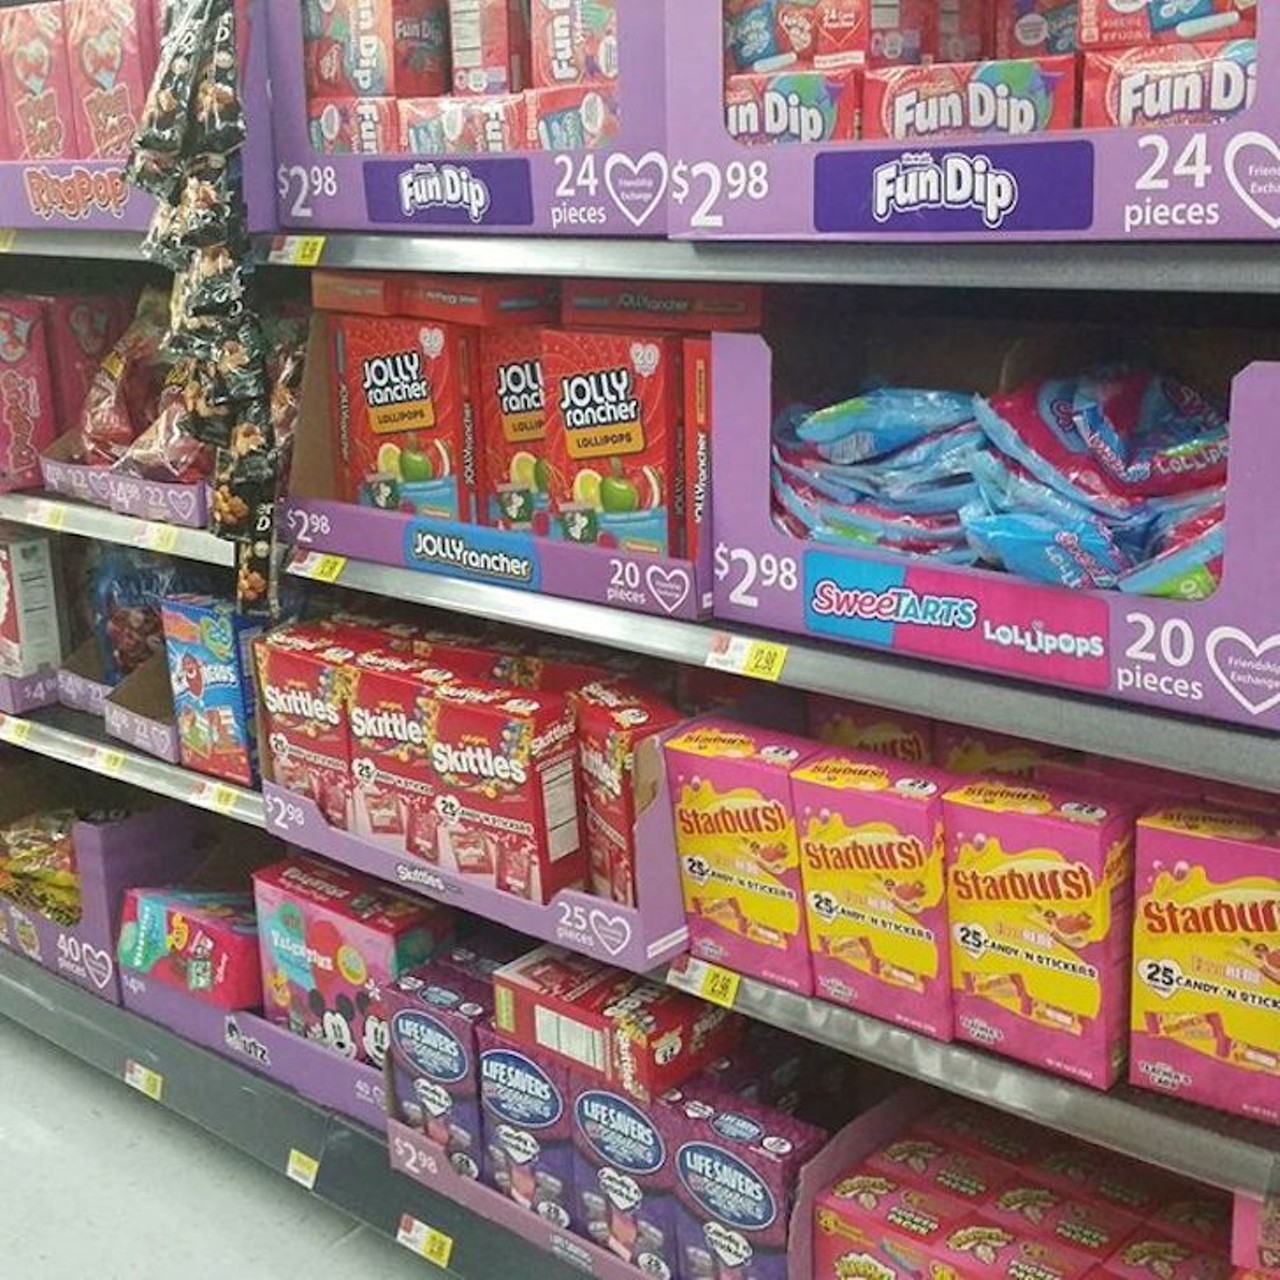 Go shopping for discounted candy like a baller at the dollar store. 
Photo via Instagram (har2bqueen)